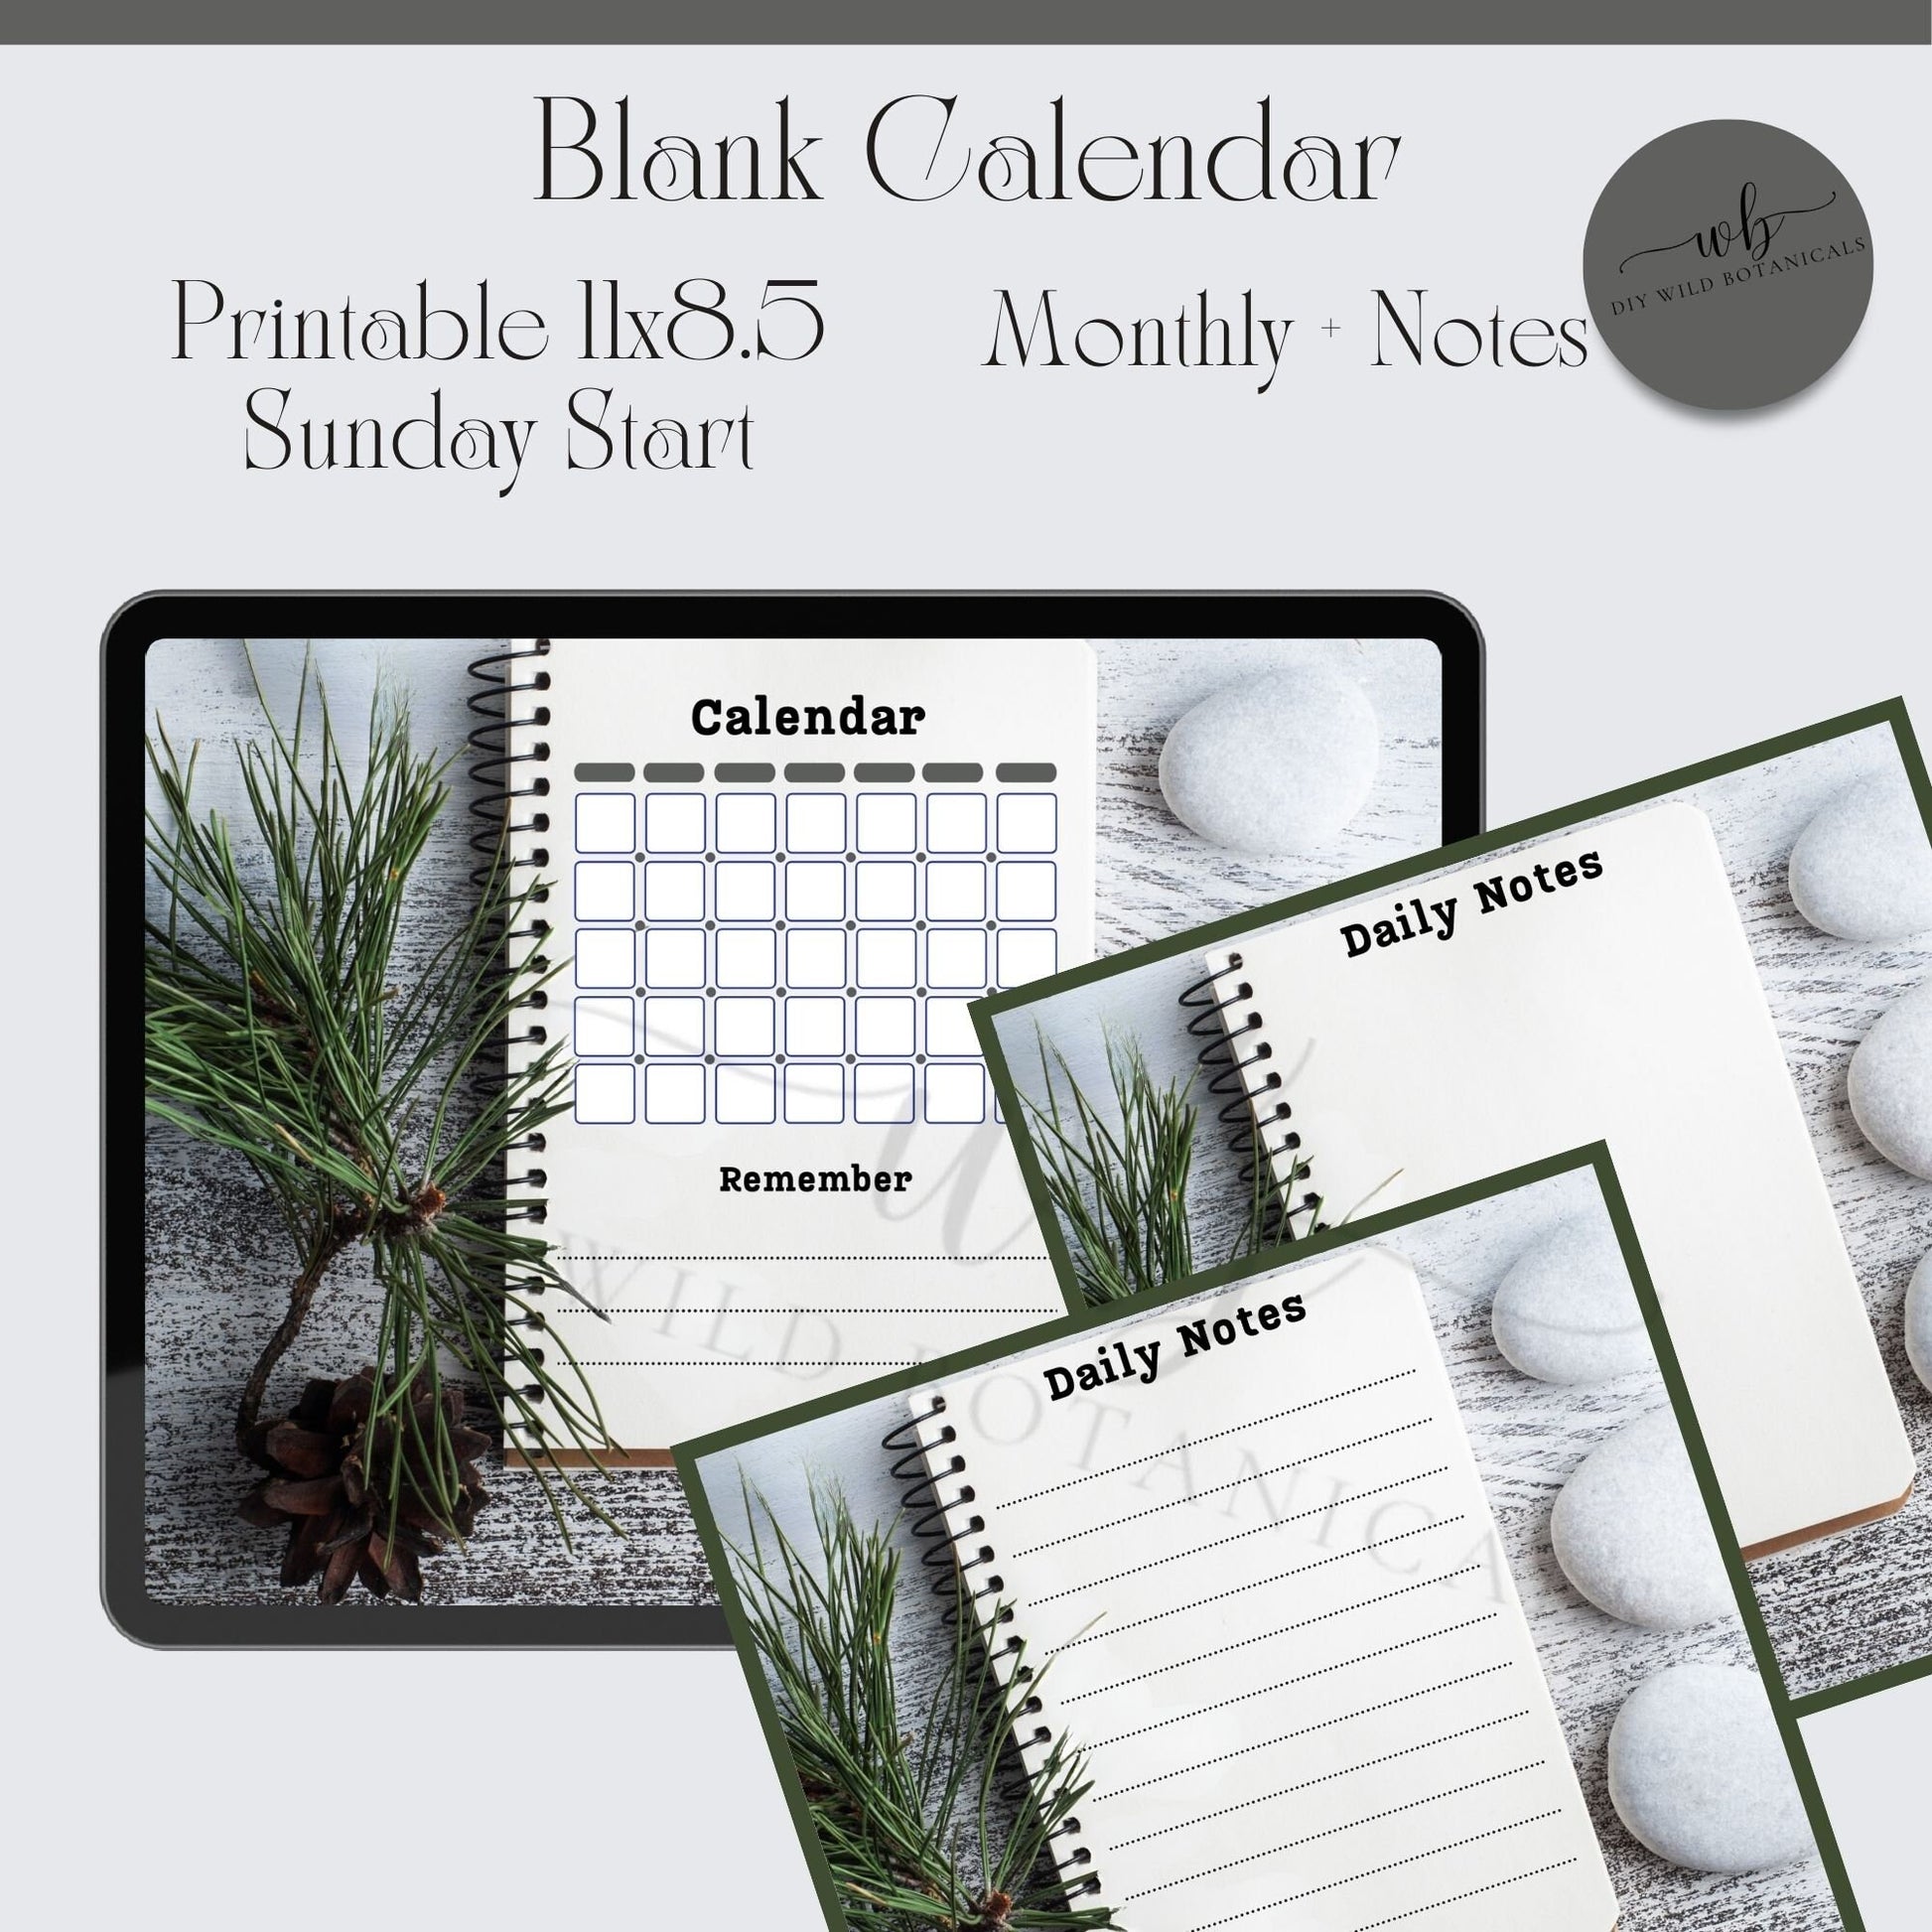 Blank Floral Calendar, Weekly Printable Pages, Printable Calendar Notes, Digitaldownload, Digital-Pages, Everyday Calendar, Multiple Sizes